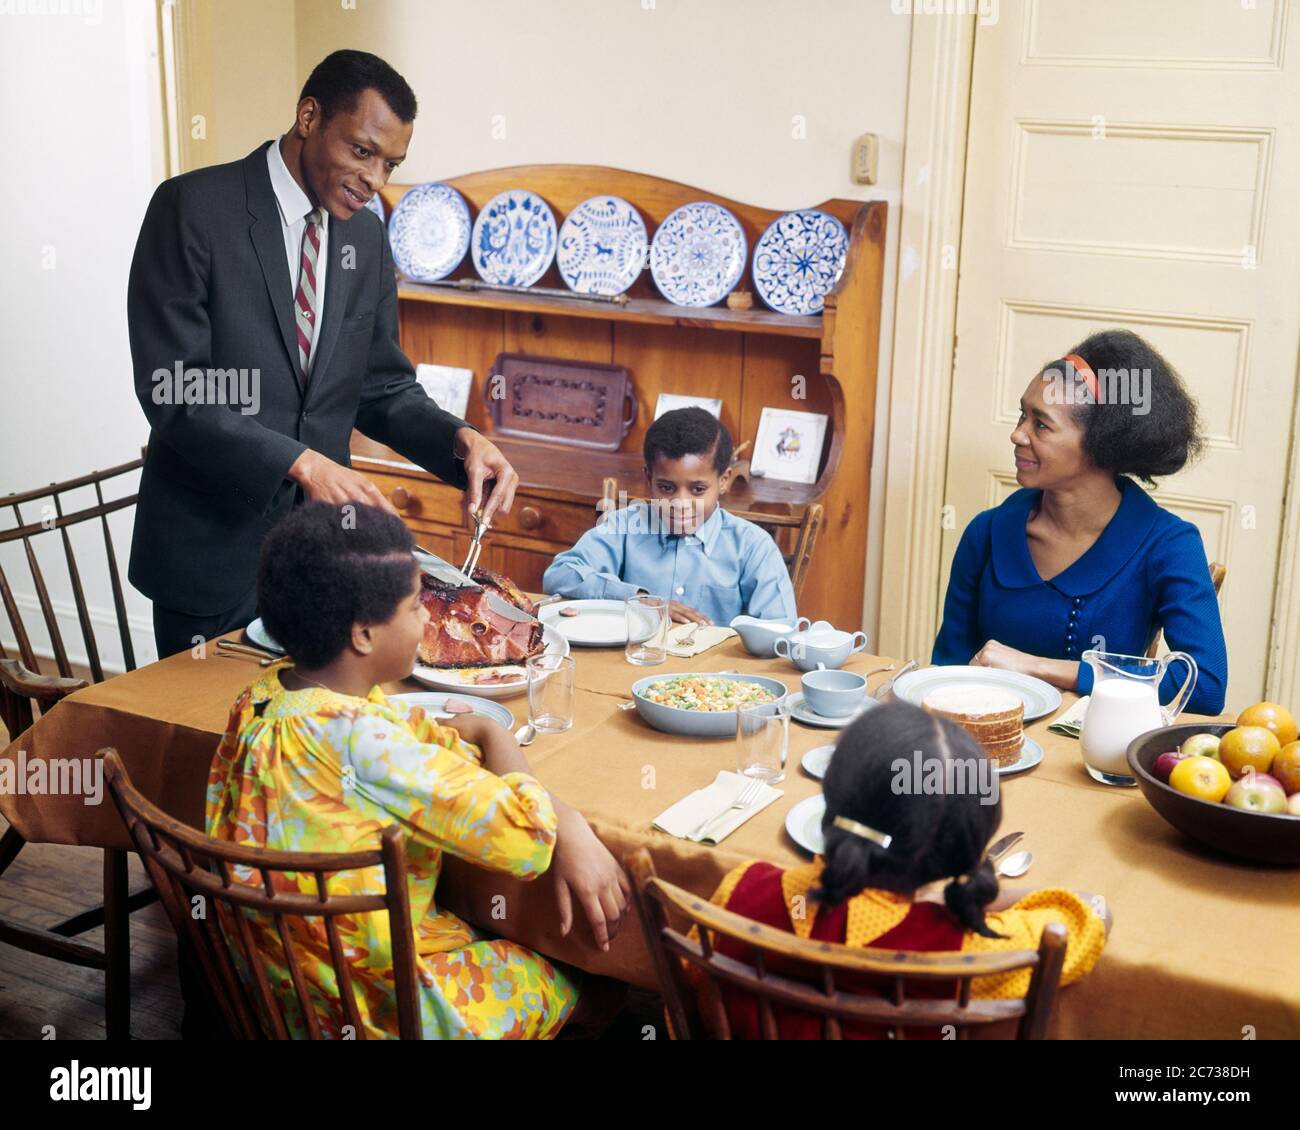 1960s 1970s AFRICAN AMERICAN FAMILY AT THE DINNER TABLE MOTHER FATHER DAUGHTER SON INDOOR TOGETHER - kd3108 PHT001 HARS INDOORS THANKSGIVING ETHNIC NOSTALGIC DIVERSITY COLOR RELATIONSHIP MOTHERS OLD TIME NOSTALGIA OLD FASHION JUVENILE SECURITY SONS FAMILIES JOY PARENTING CELEBRATION FEMALES HUSBANDS GROWNUP HEALTHINESS HOME LIFE COPY SPACE HALF-LENGTH DAUGHTERS PERSONS GROWN-UP MALES AMERICANS FATHERS HUSBAND AND WIFE MEN AND WOMEN PATERNAL PARENT AND CHILD HUSBANDS AND WIVES HOMEMAKER PARENTS AND CHILDREN FATHERHOOD MATERNAL MINORITY HAPPINESS HOMEMAKERS NOURISH LEISURE AFRICAN-AMERICANS Stock Photo